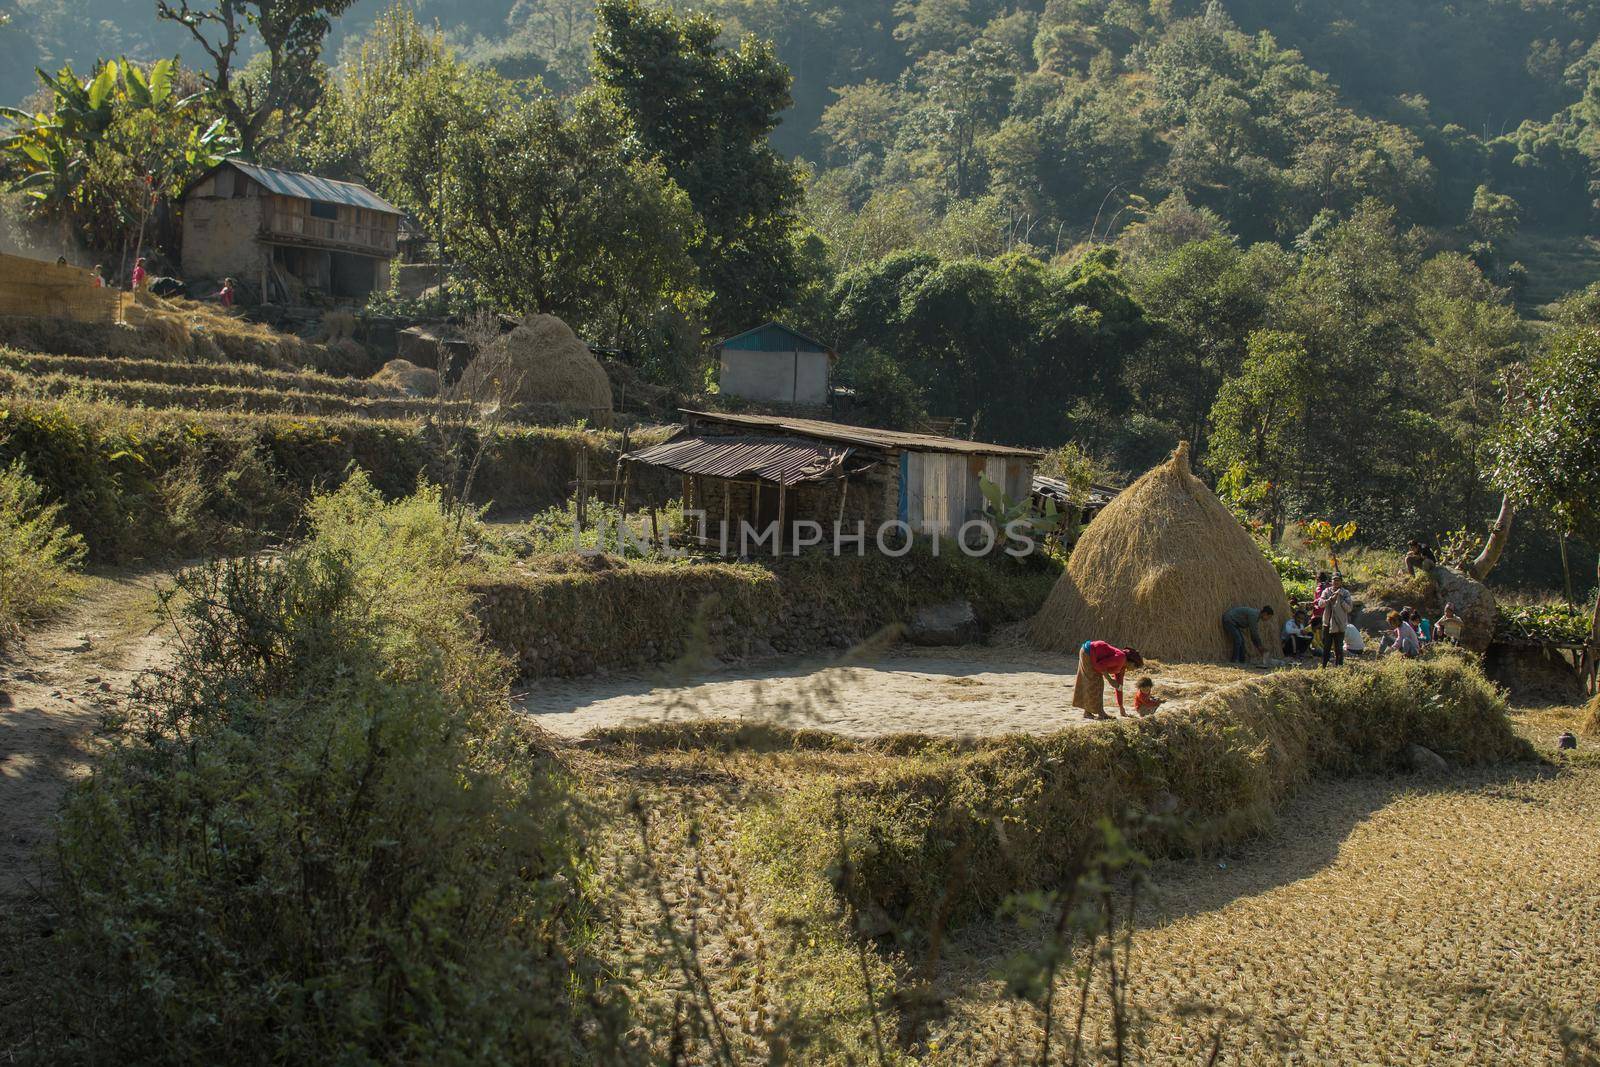 Family at a rural farm in the nepalese mountains, Annapurna circuit